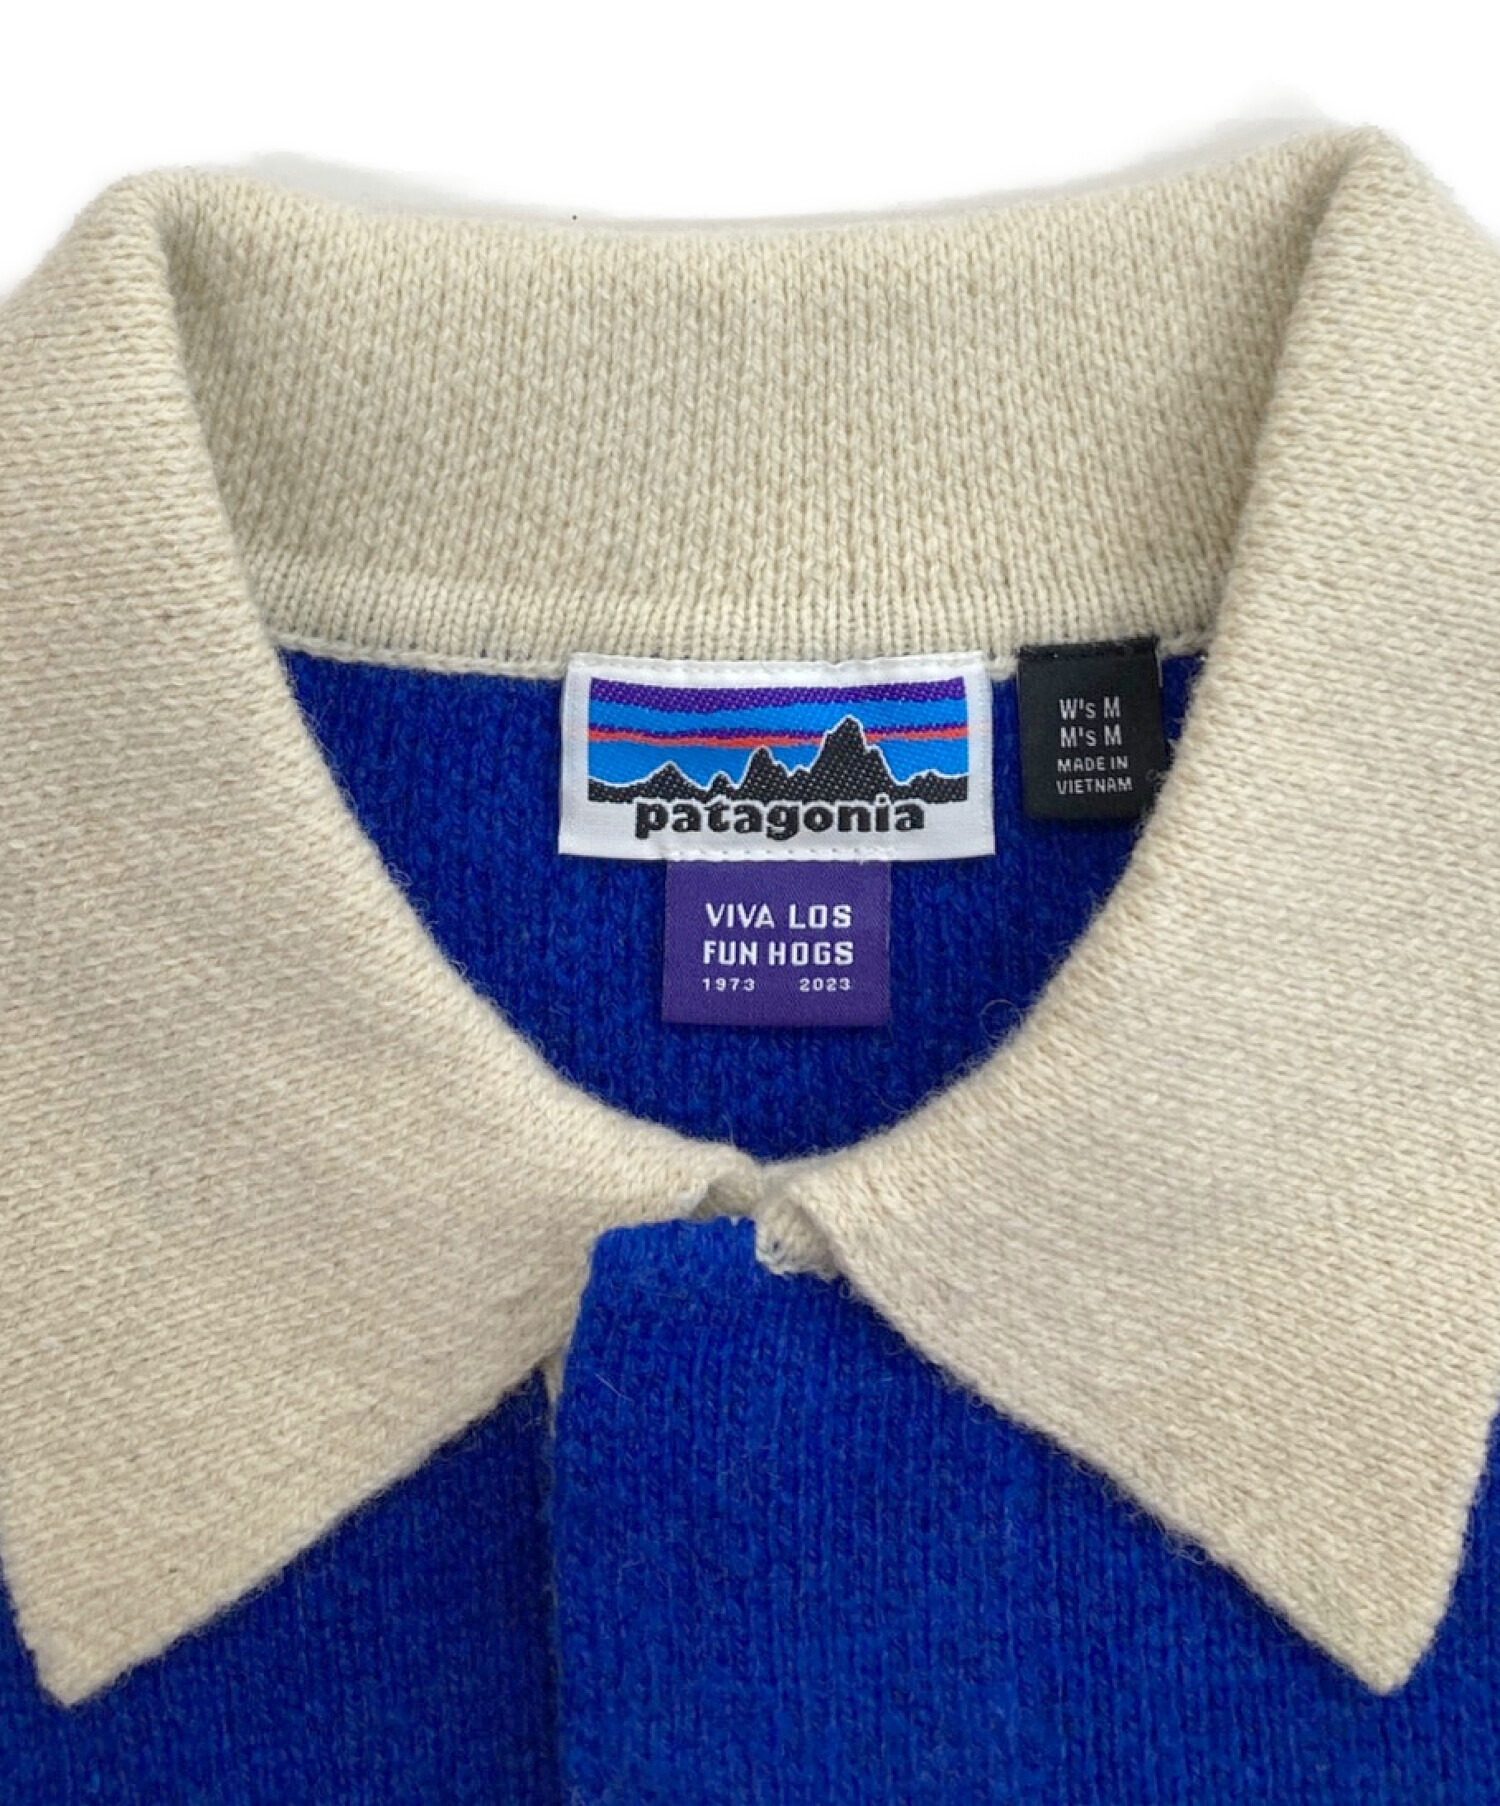 Patagonia (パタゴニア) Recycled Wool Blend Rugby Sweater ブルー サイズ:M